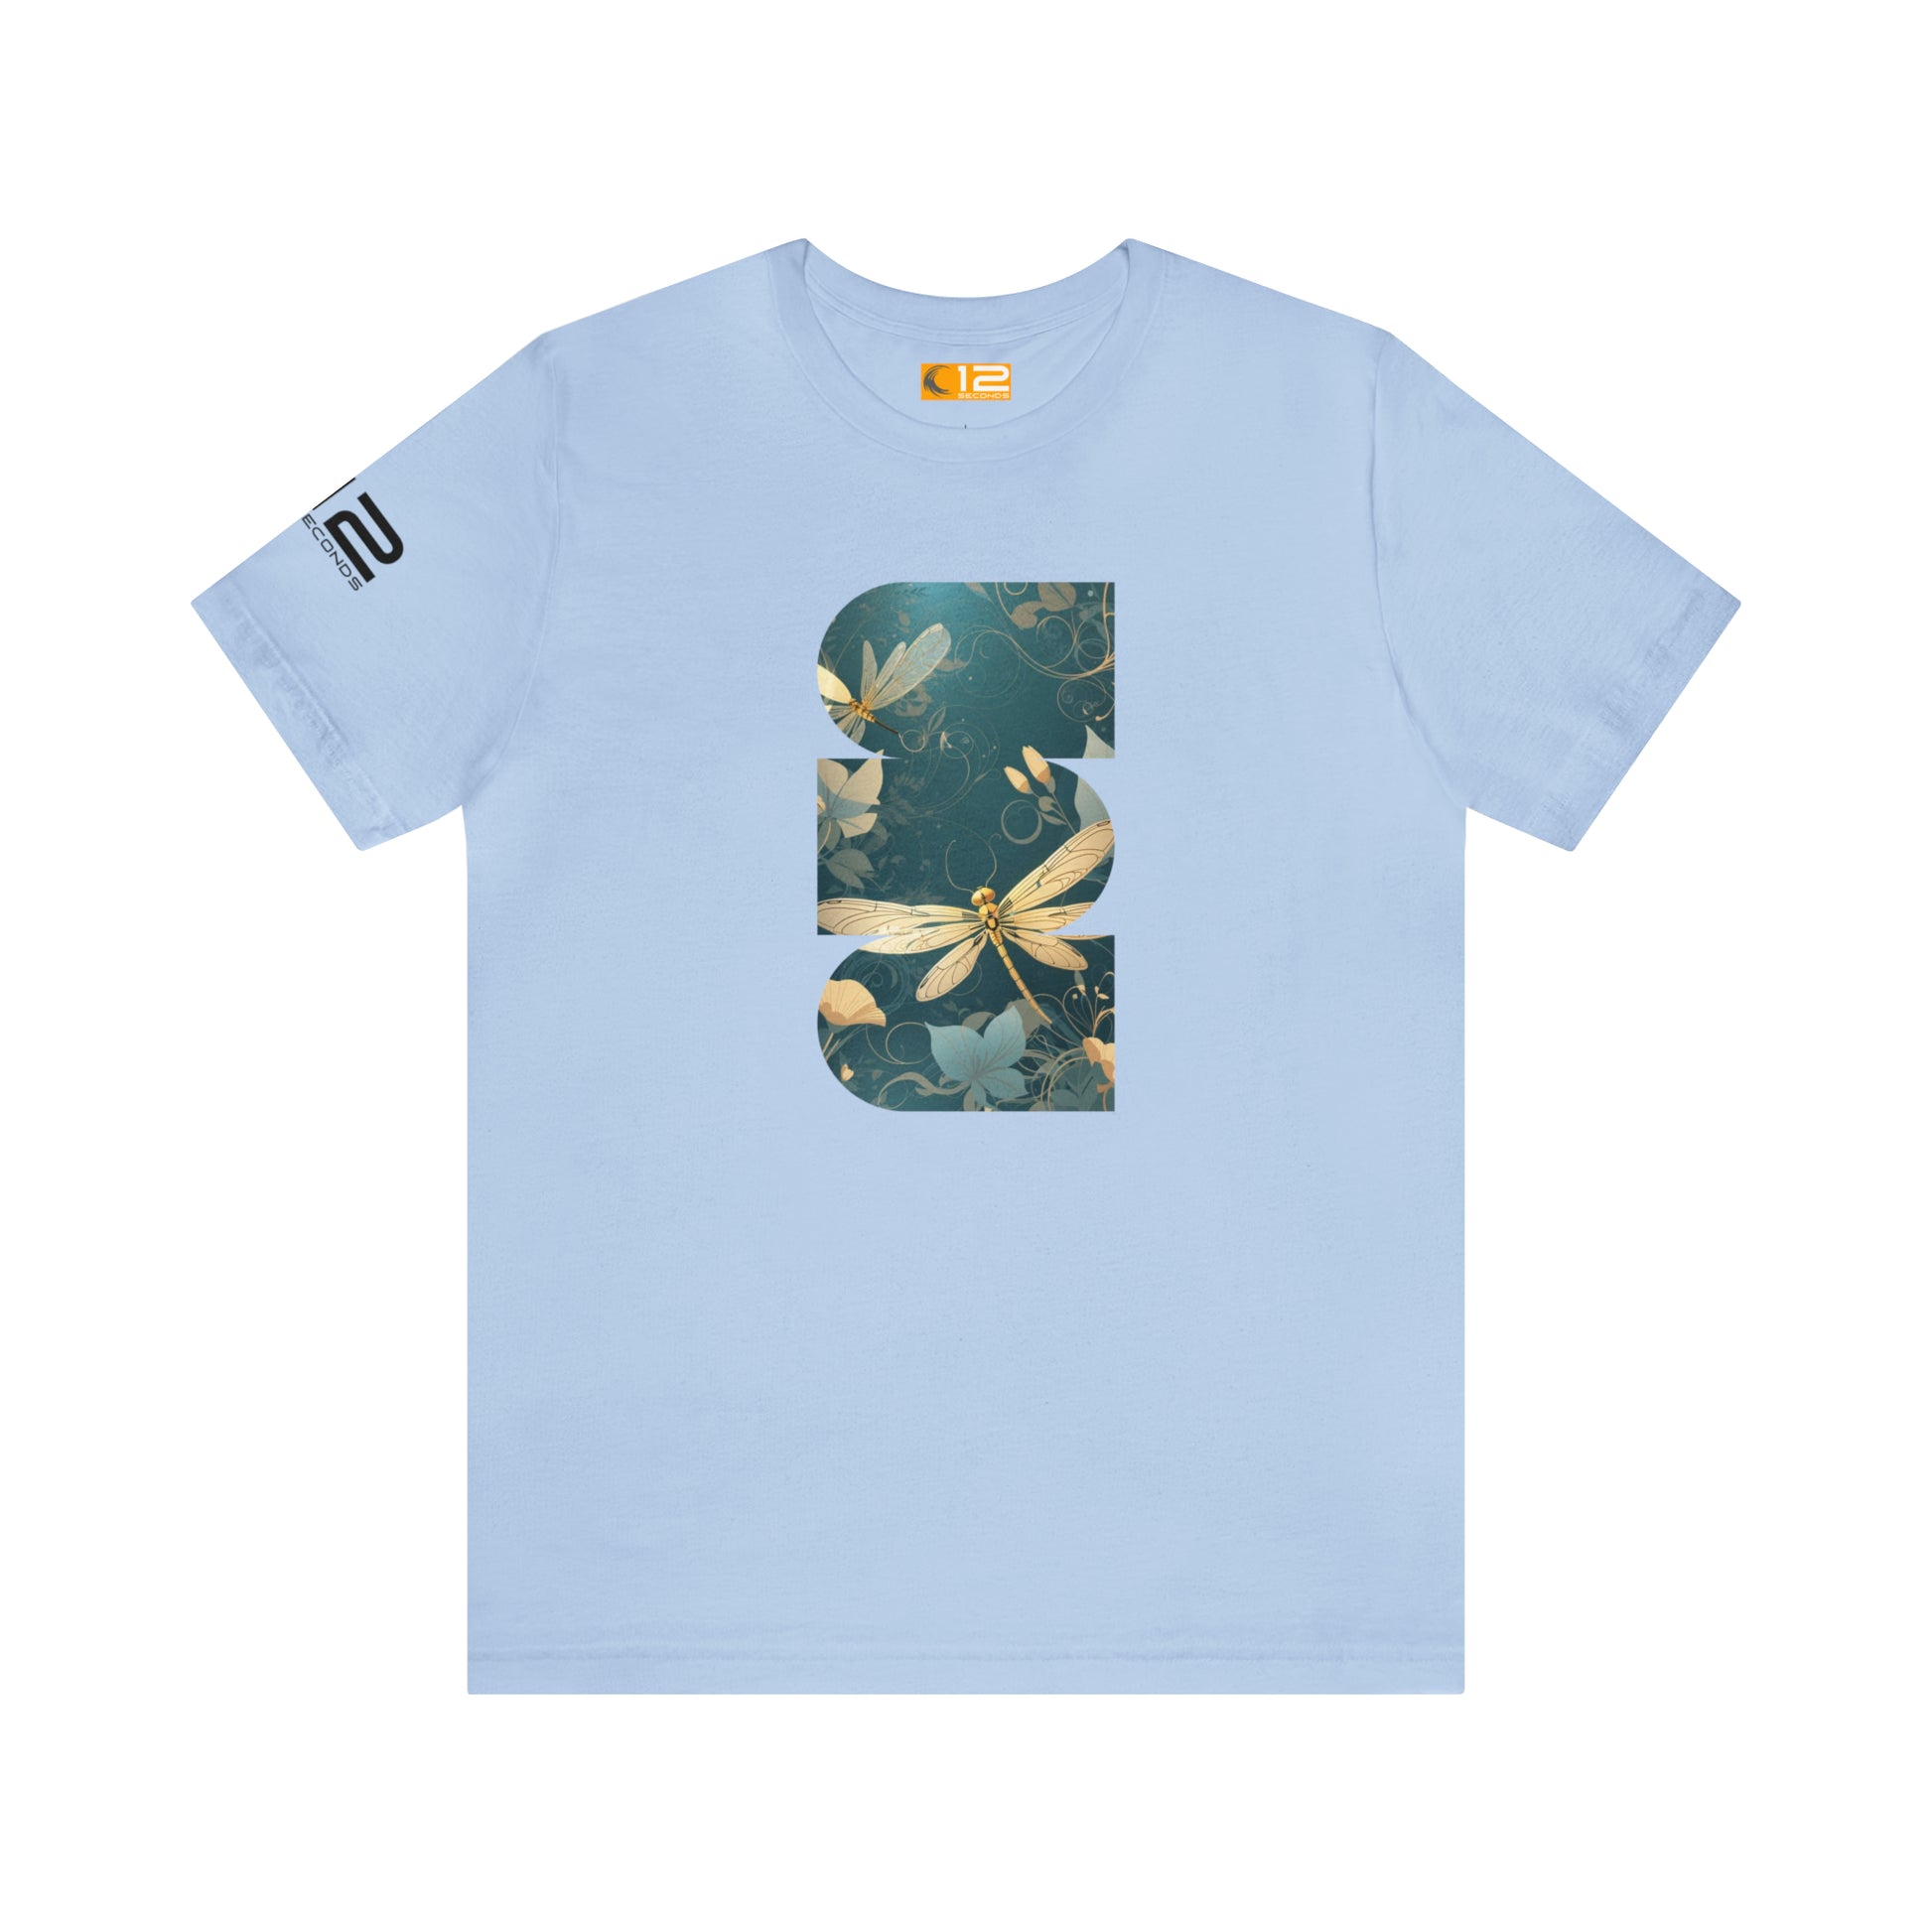 Jersey Short Sleeve Tee - DRAGONFLY UTOPIA - 12 SECONDS APPAREL